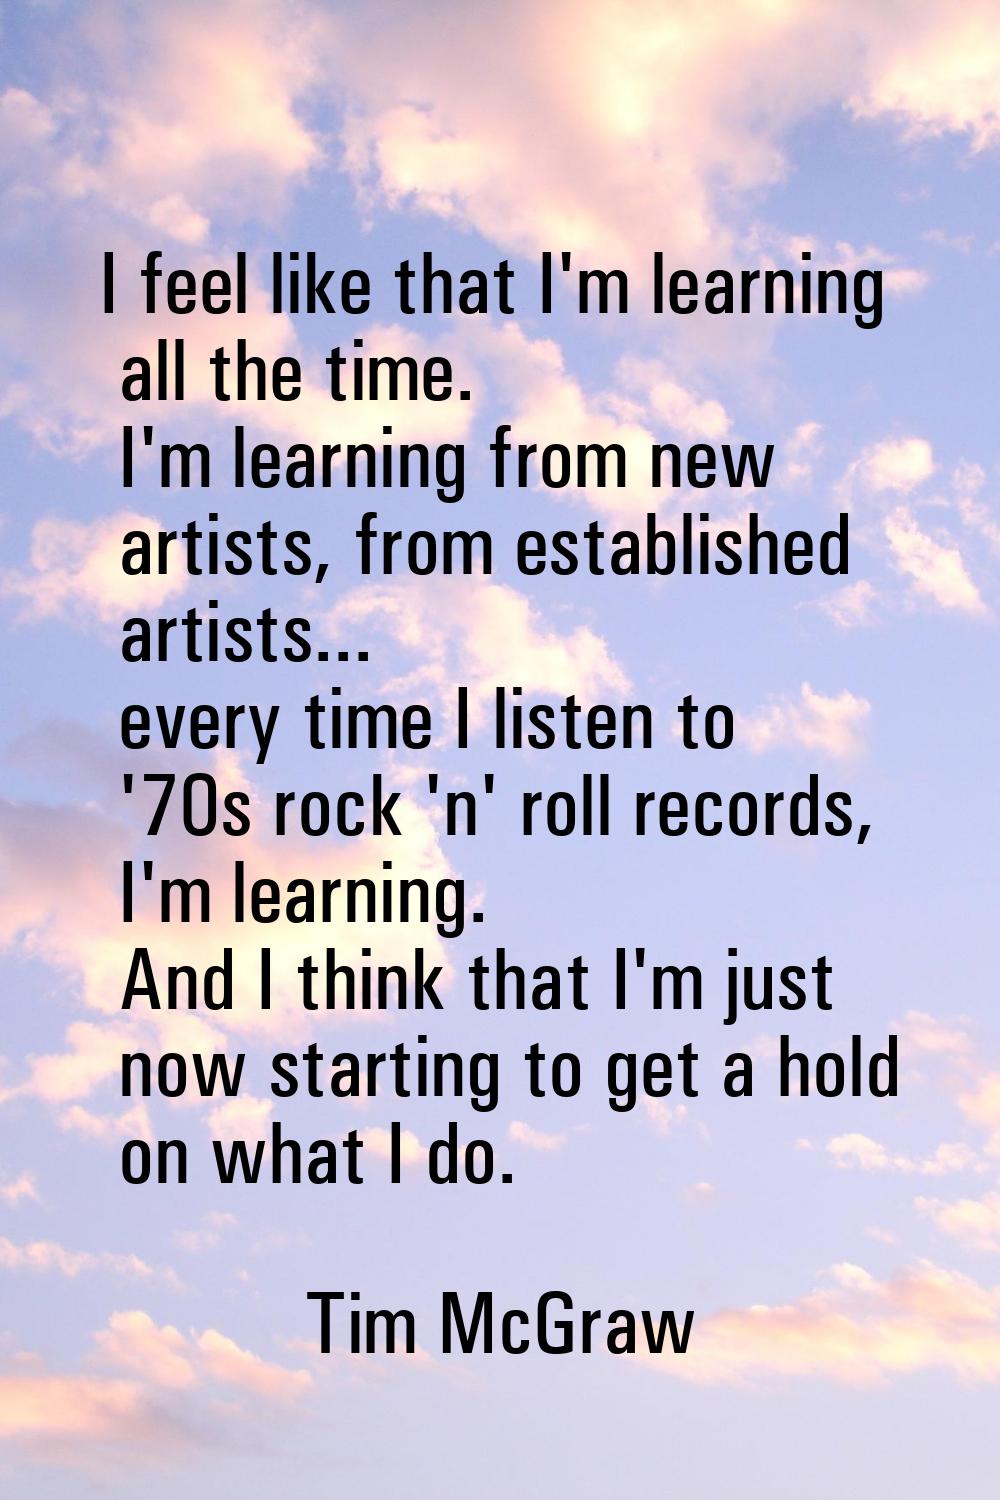 I feel like that I'm learning all the time. I'm learning from new artists, from established artists